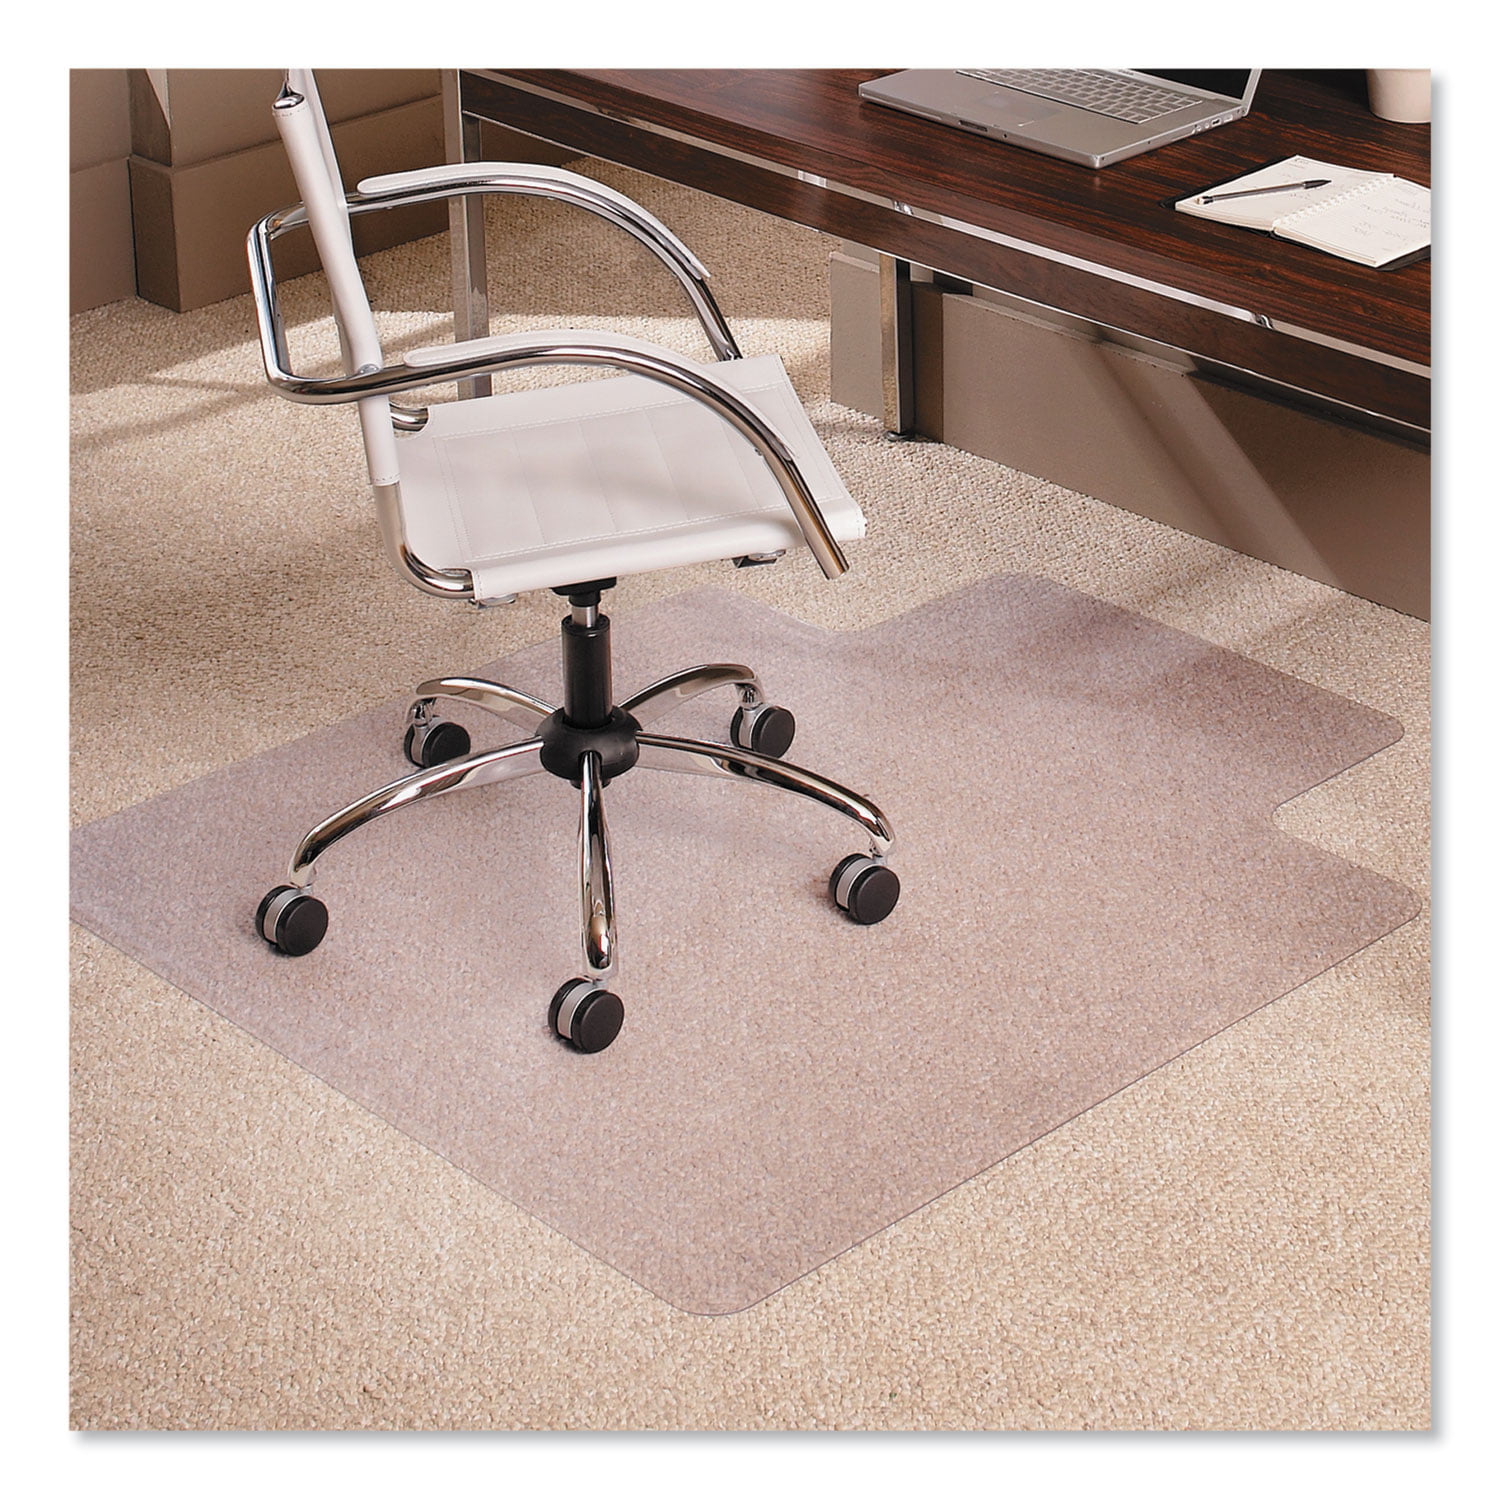 1/4" or less Size 30" x 48" Clear Floortex PVC Chair Mat for Carpets 